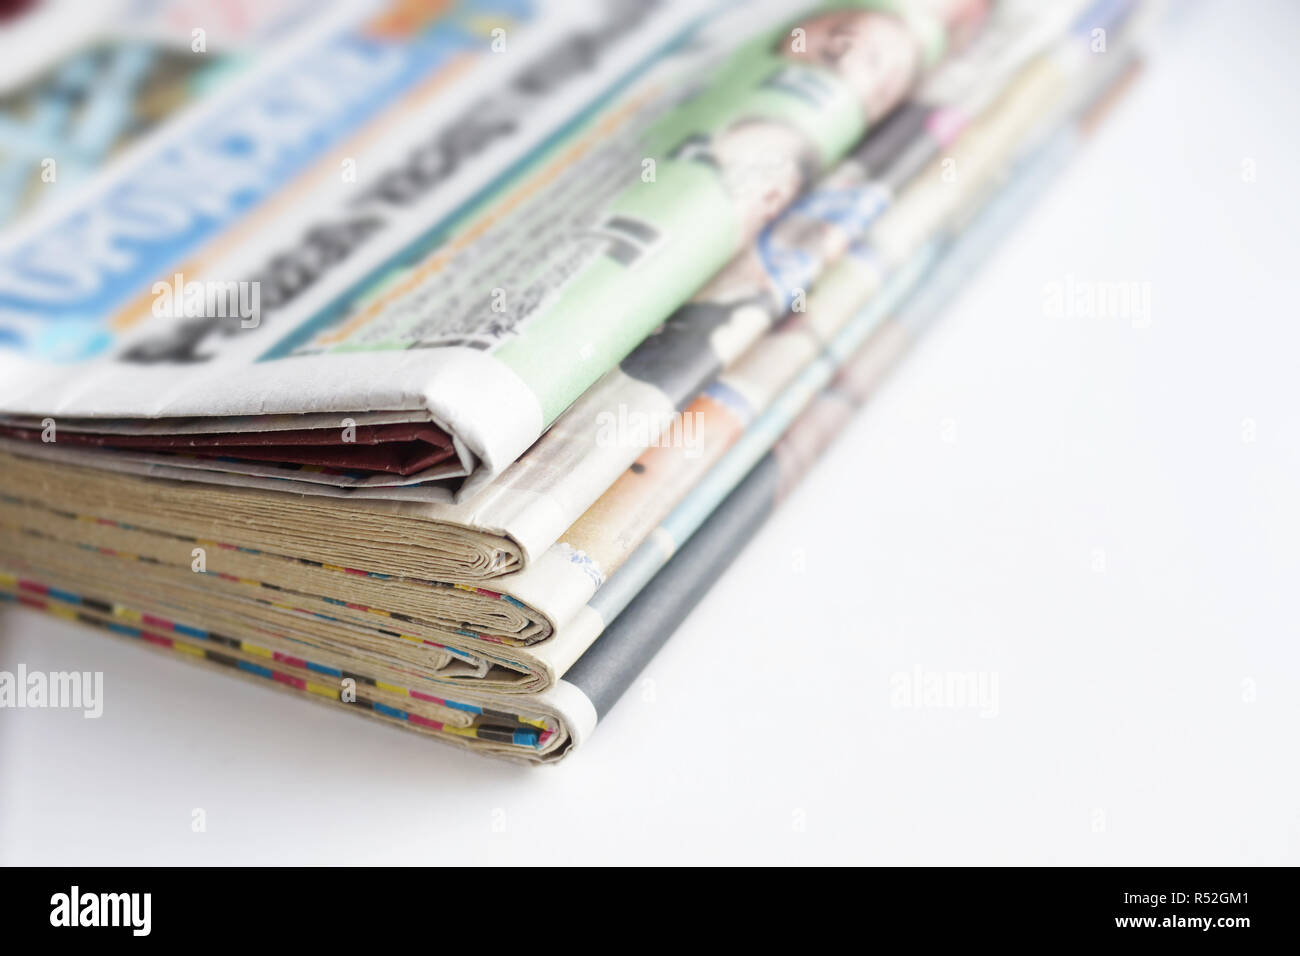 Stack of newspapers and magazines with colorful pages (headlines, articles), latest news in daily papers. Tabloid journals stacked in pile on white Stock Photo